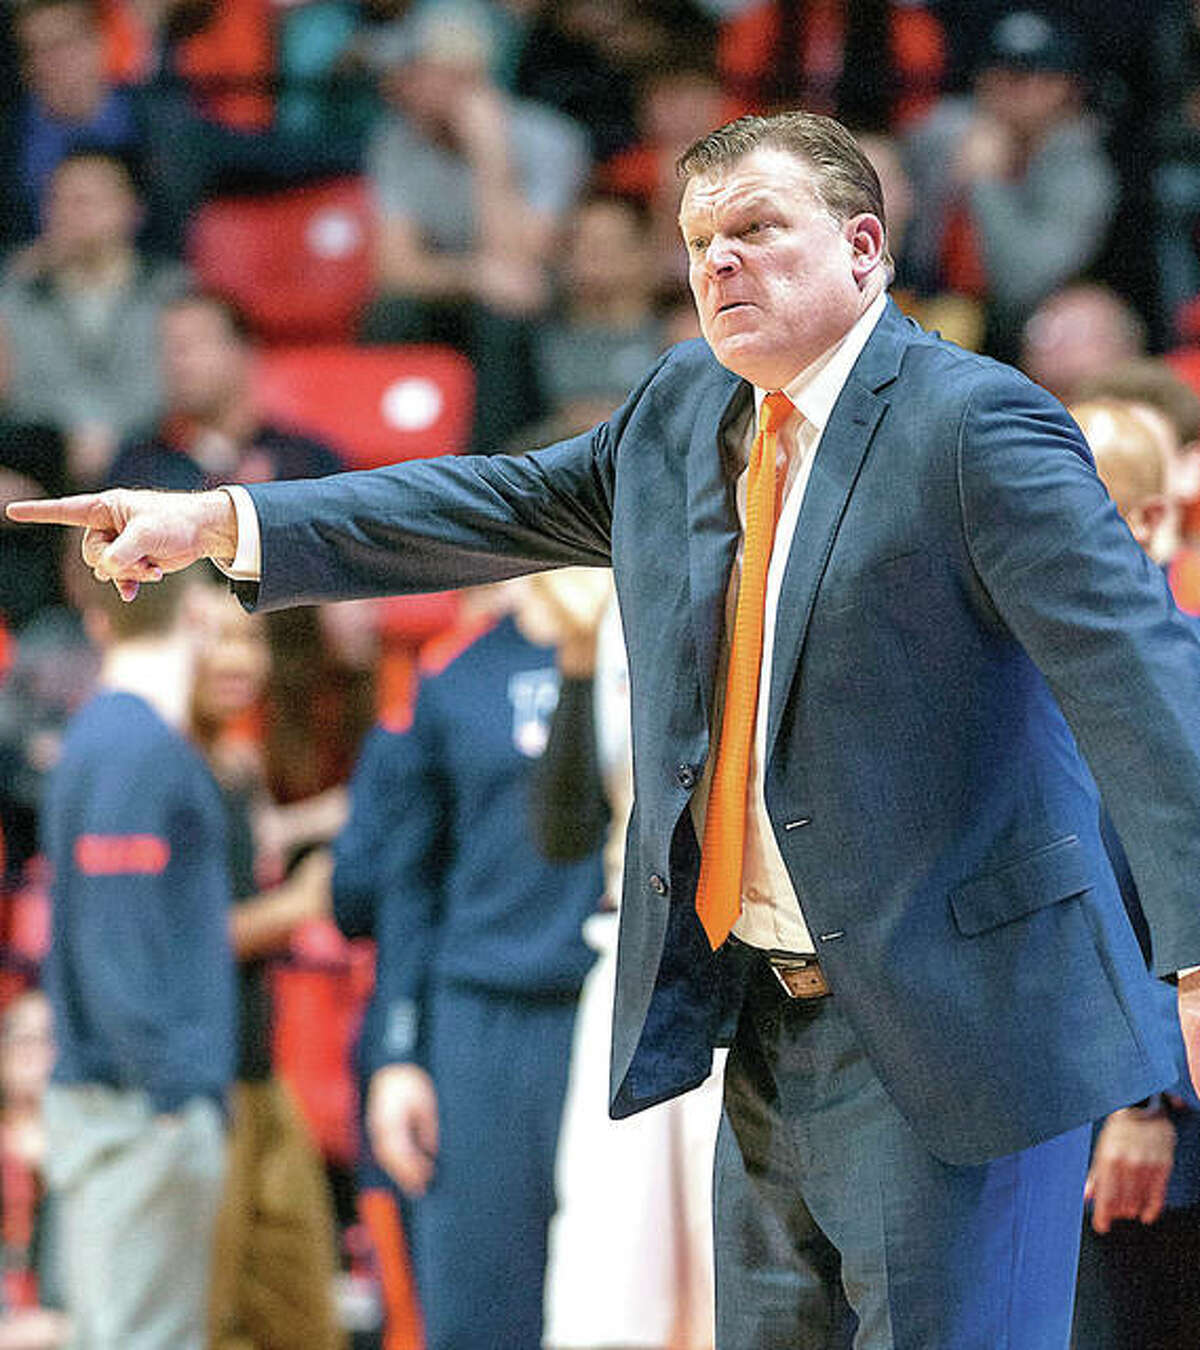 Illinois coach Brad Underwood motions to his players during Thursday night’s game against Iowa in Champaign.